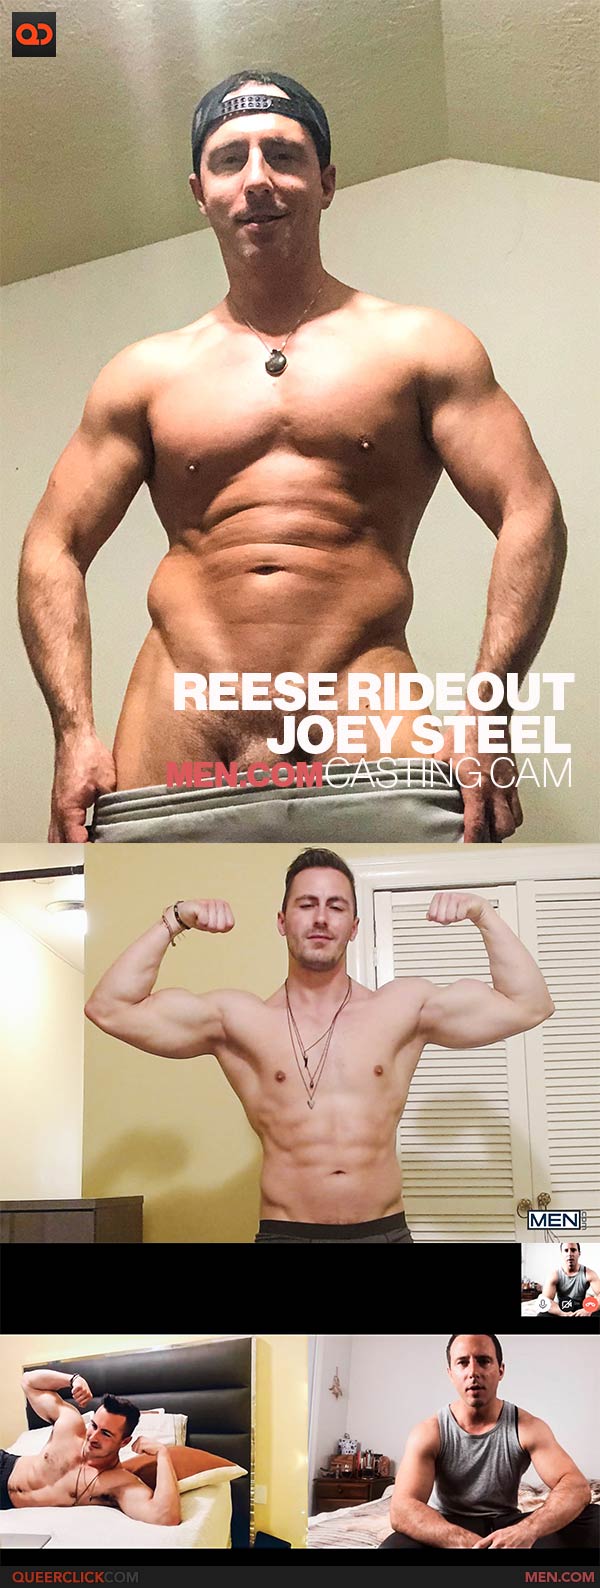 Men.com: Joey Steel and Reese Rideout